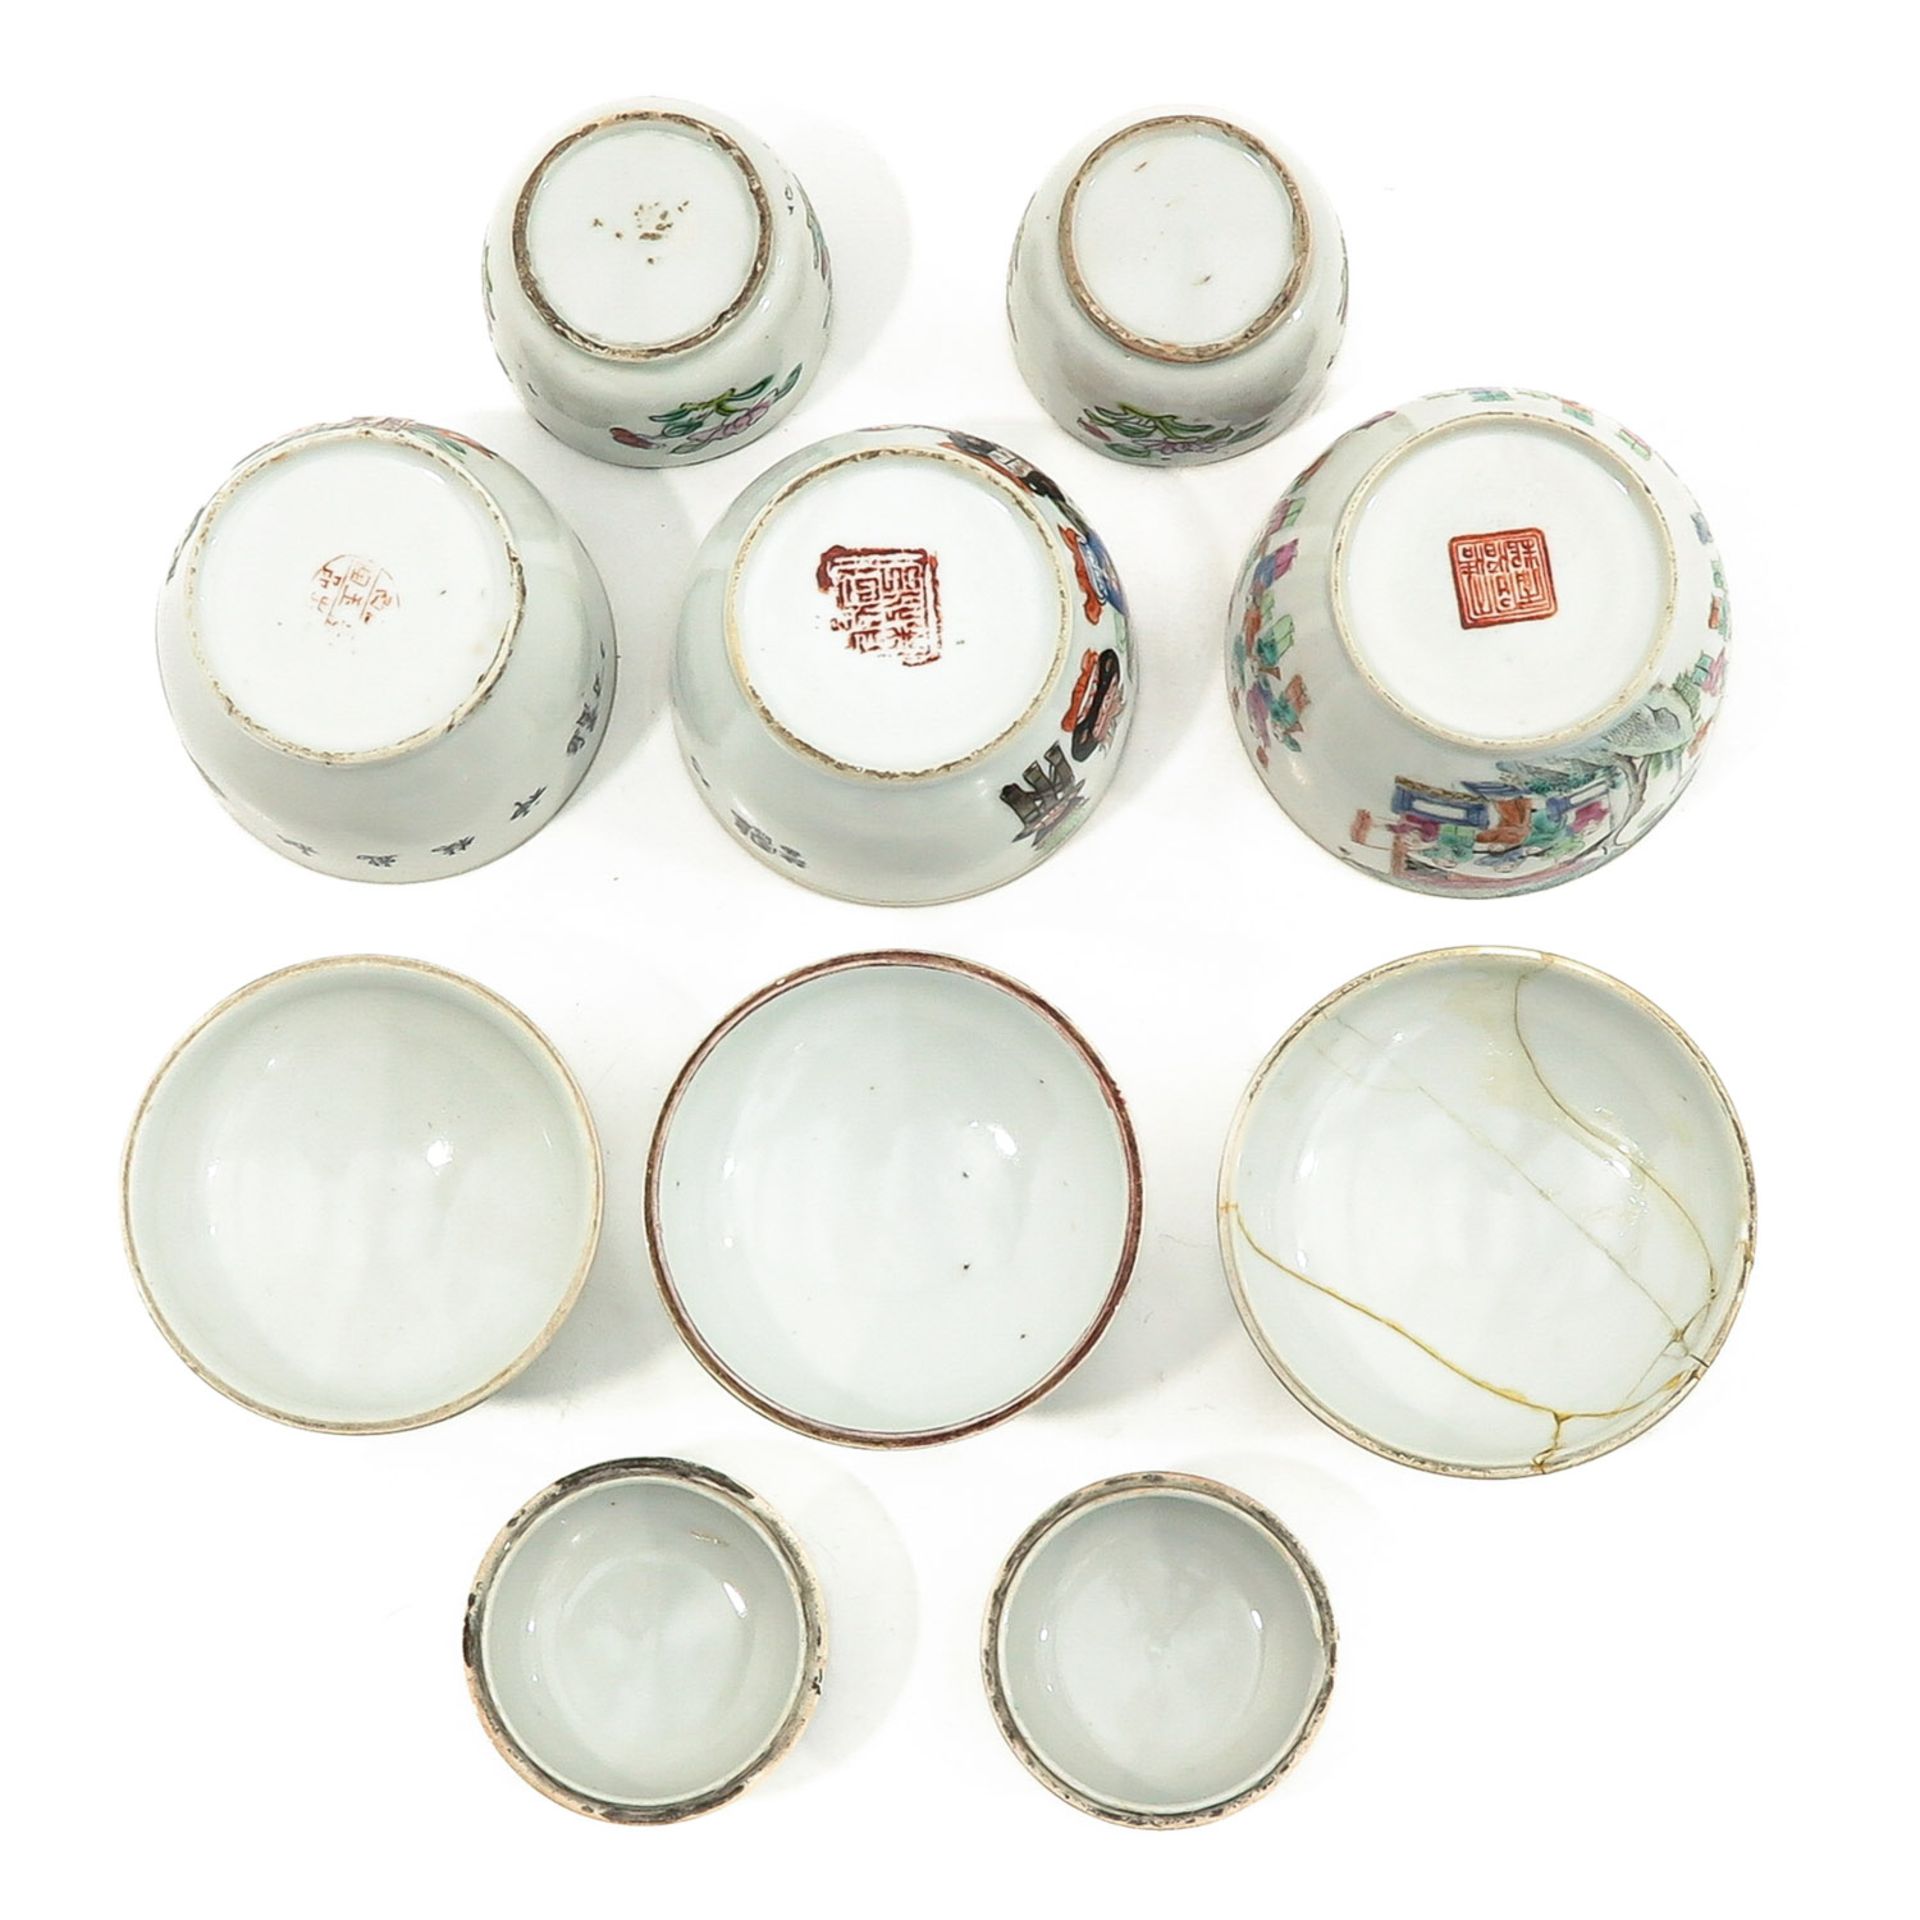 A Collection of 5 Jars with Covers - Image 6 of 10